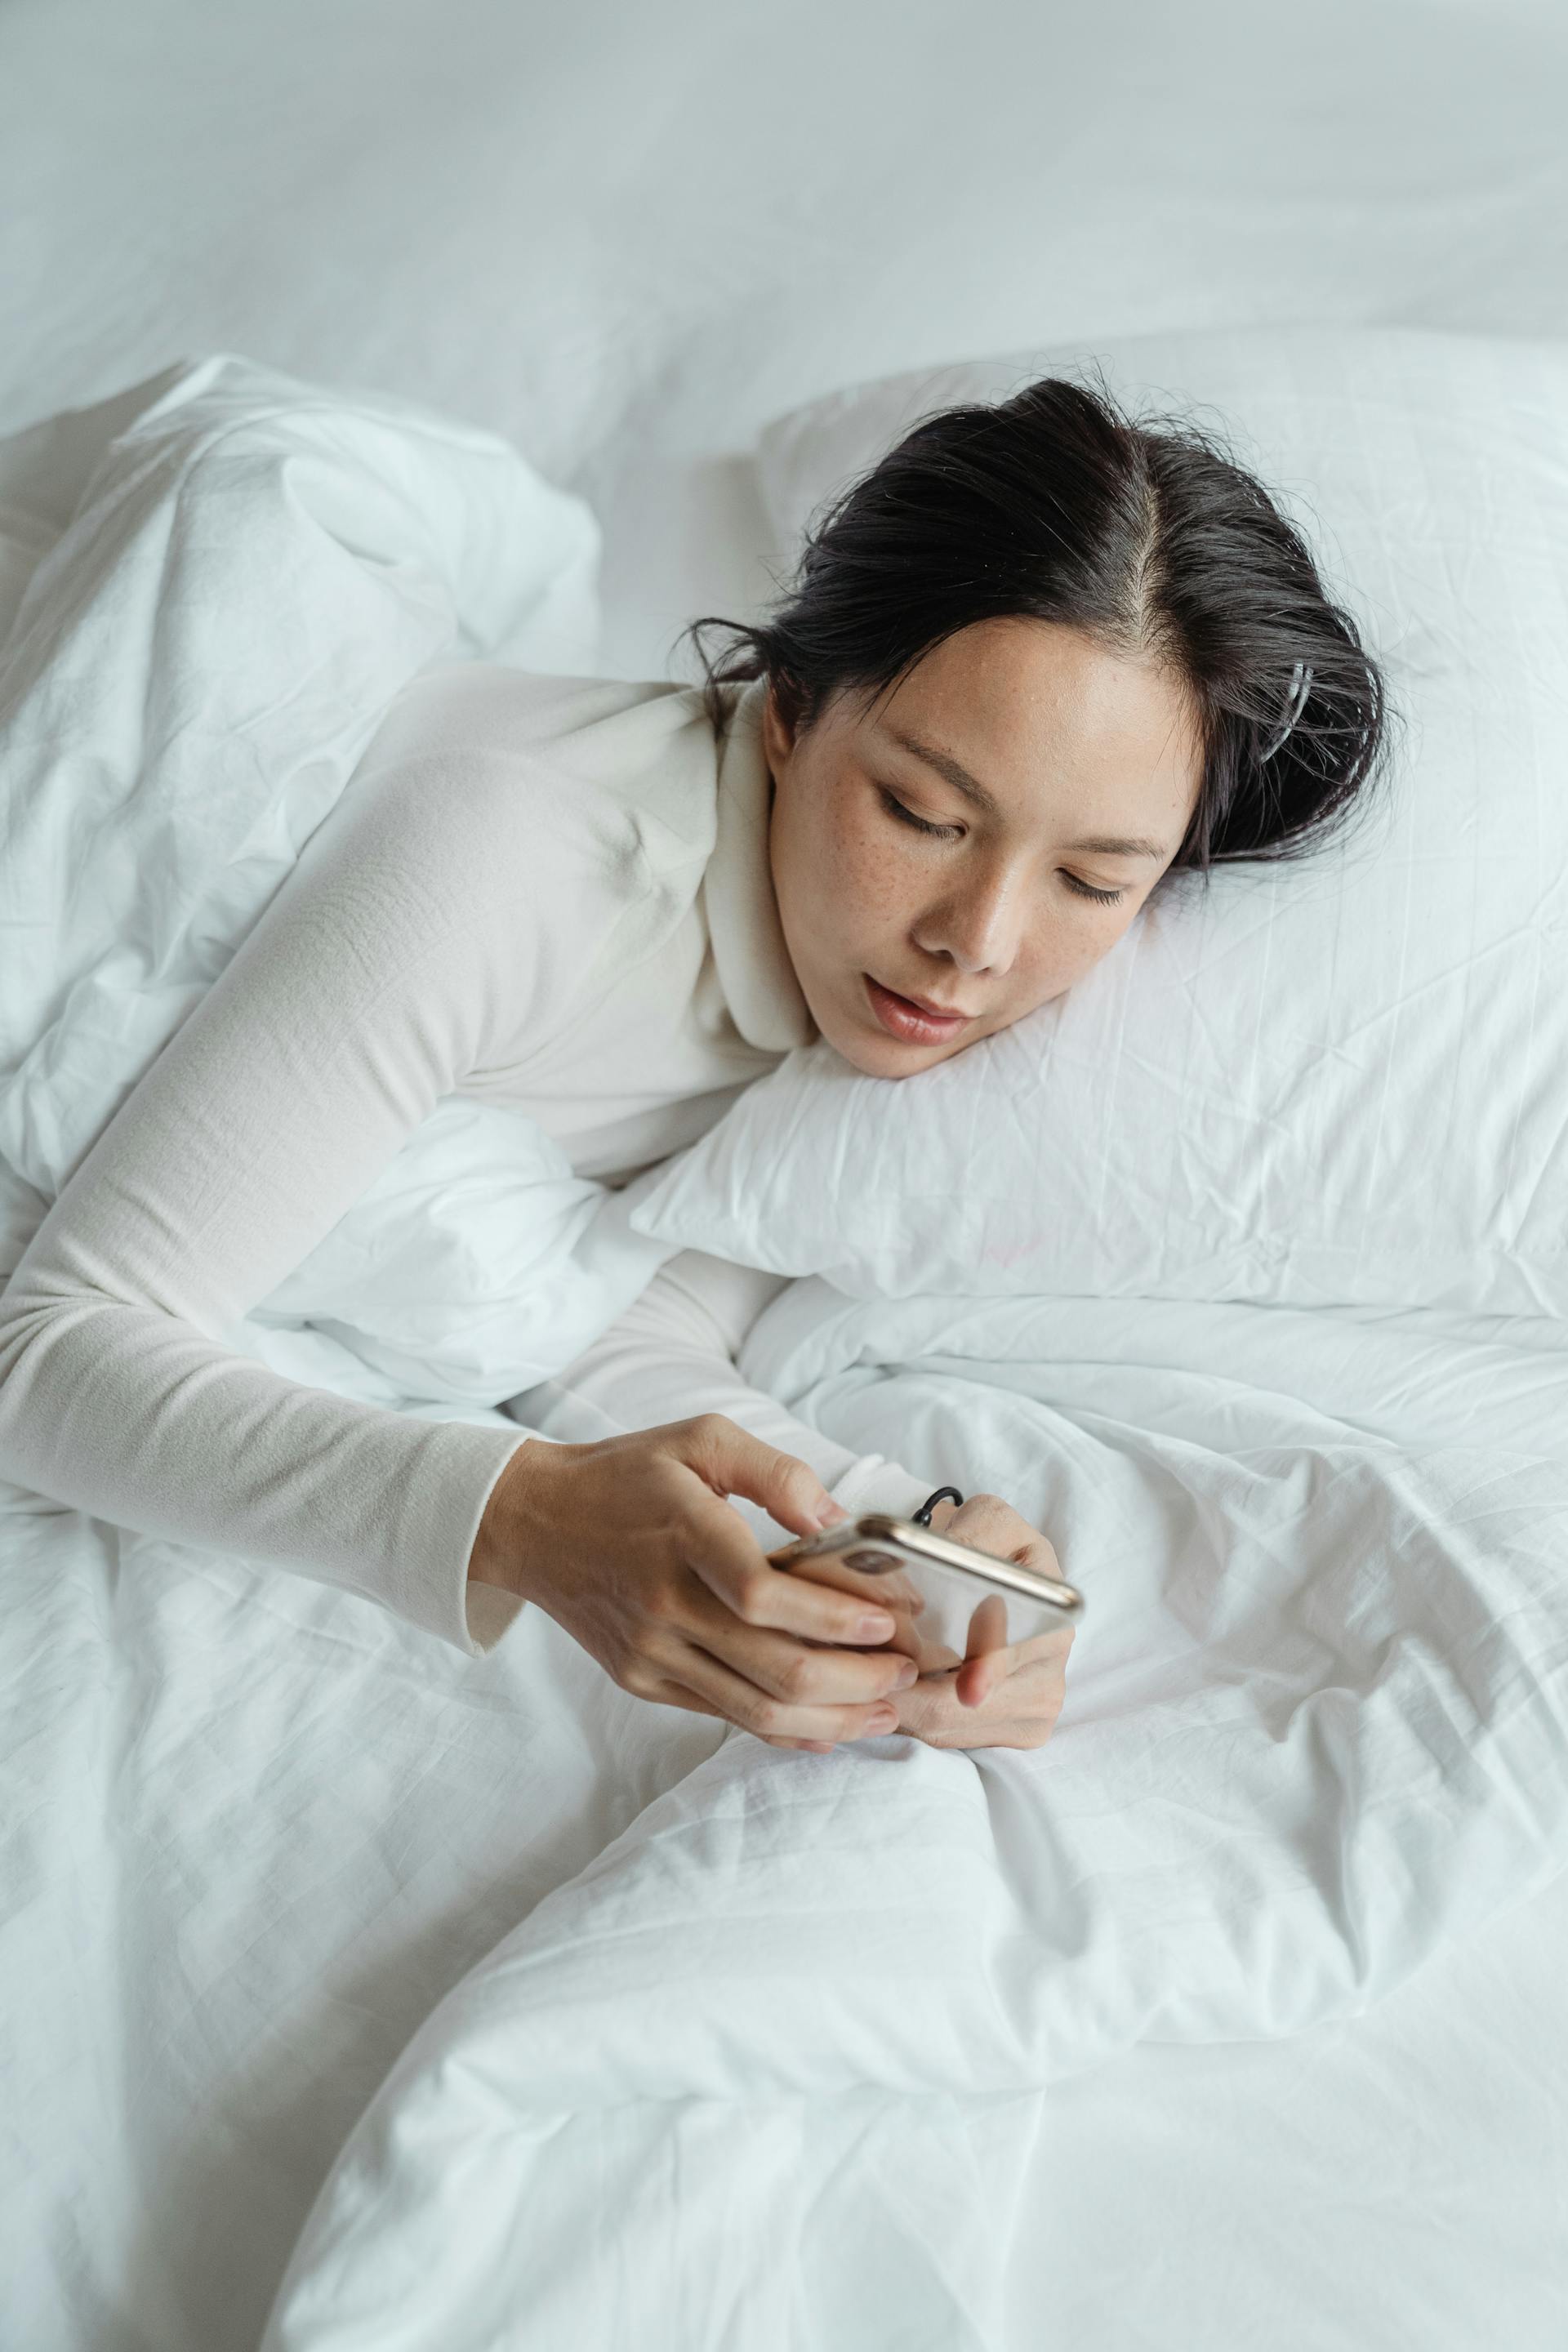 A woman using her phone in bed | Source: Pexels